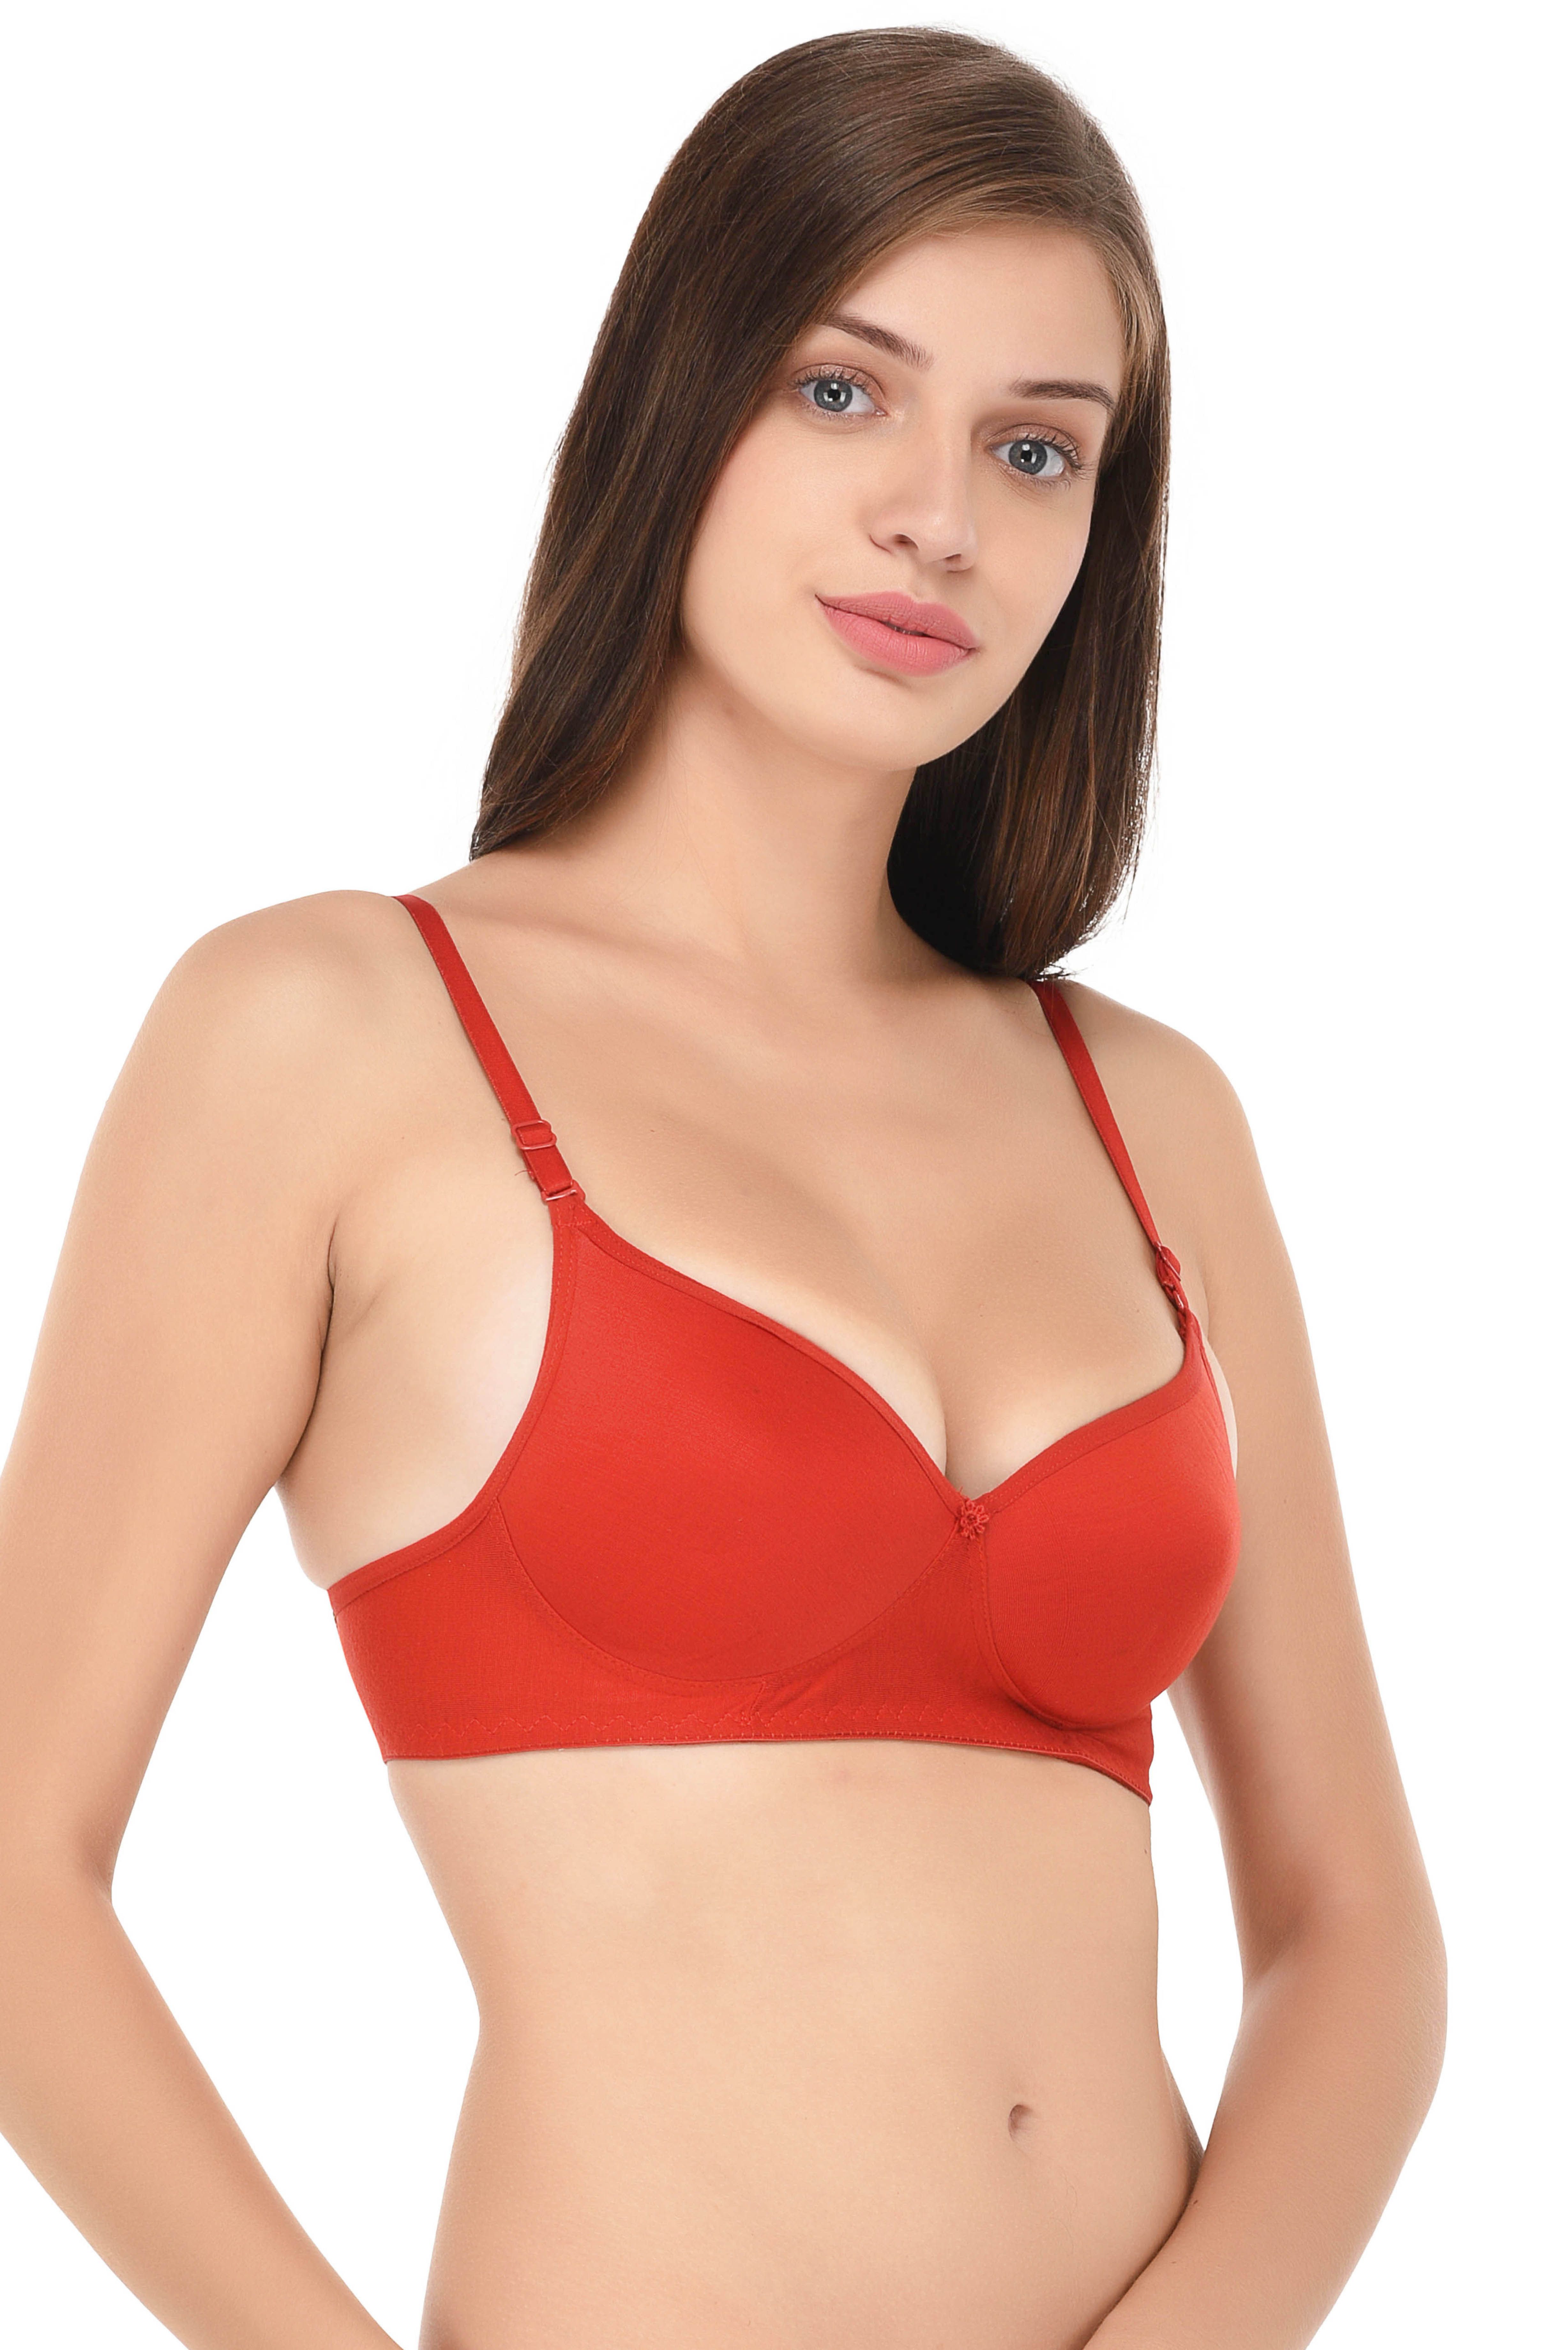 Push up bras supposed tightvnc cisco ios software 7200 software